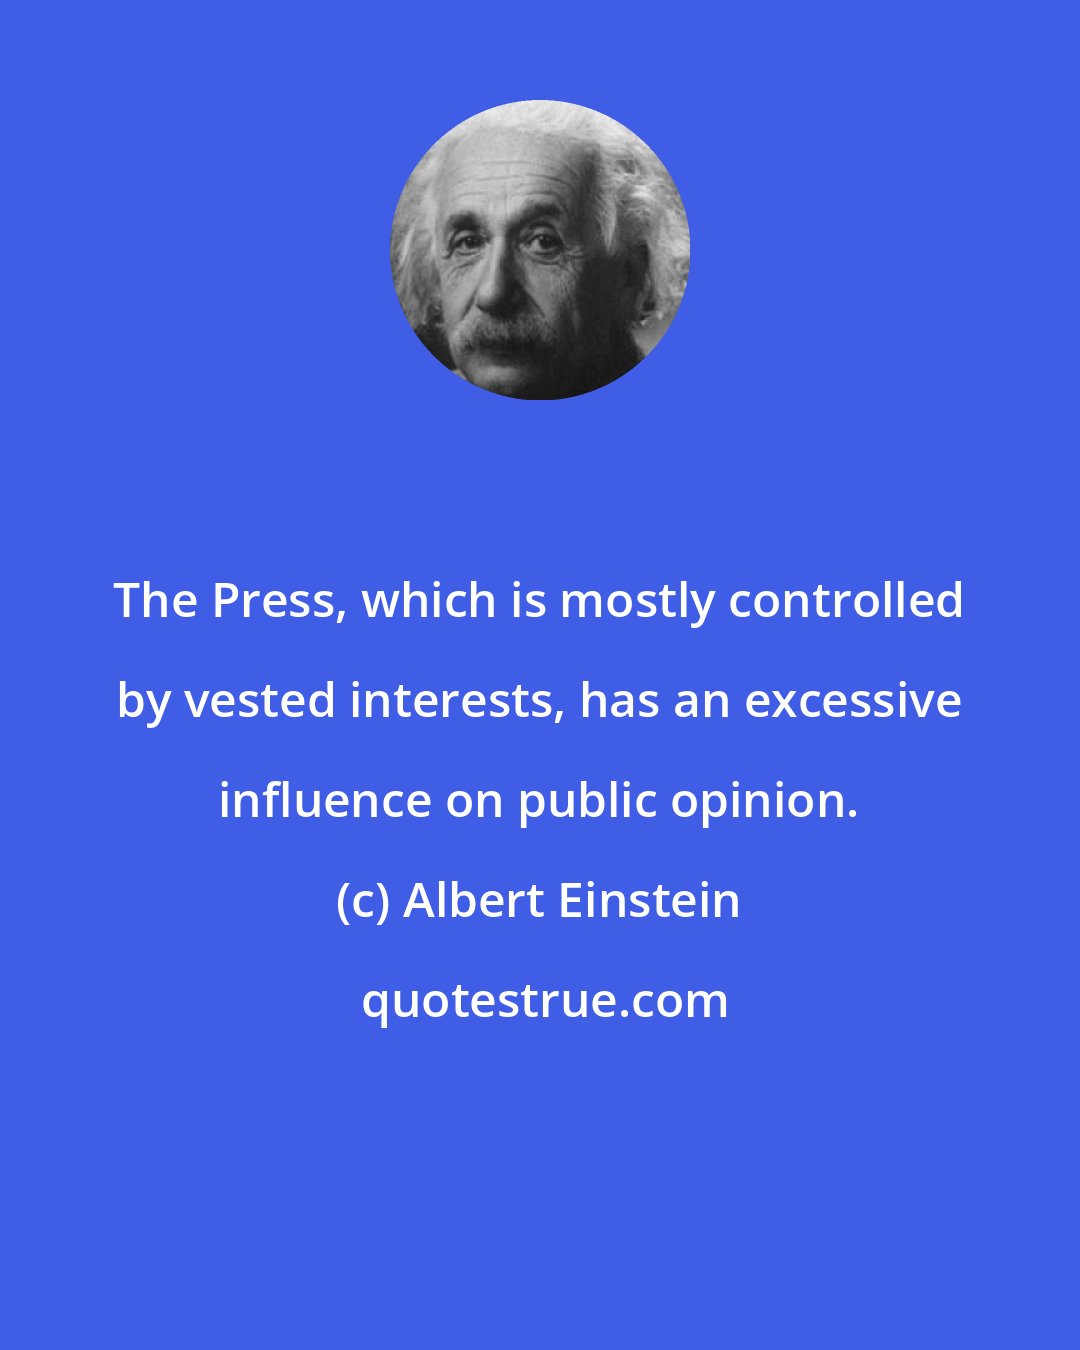 Albert Einstein: The Press, which is mostly controlled by vested interests, has an excessive influence on public opinion.